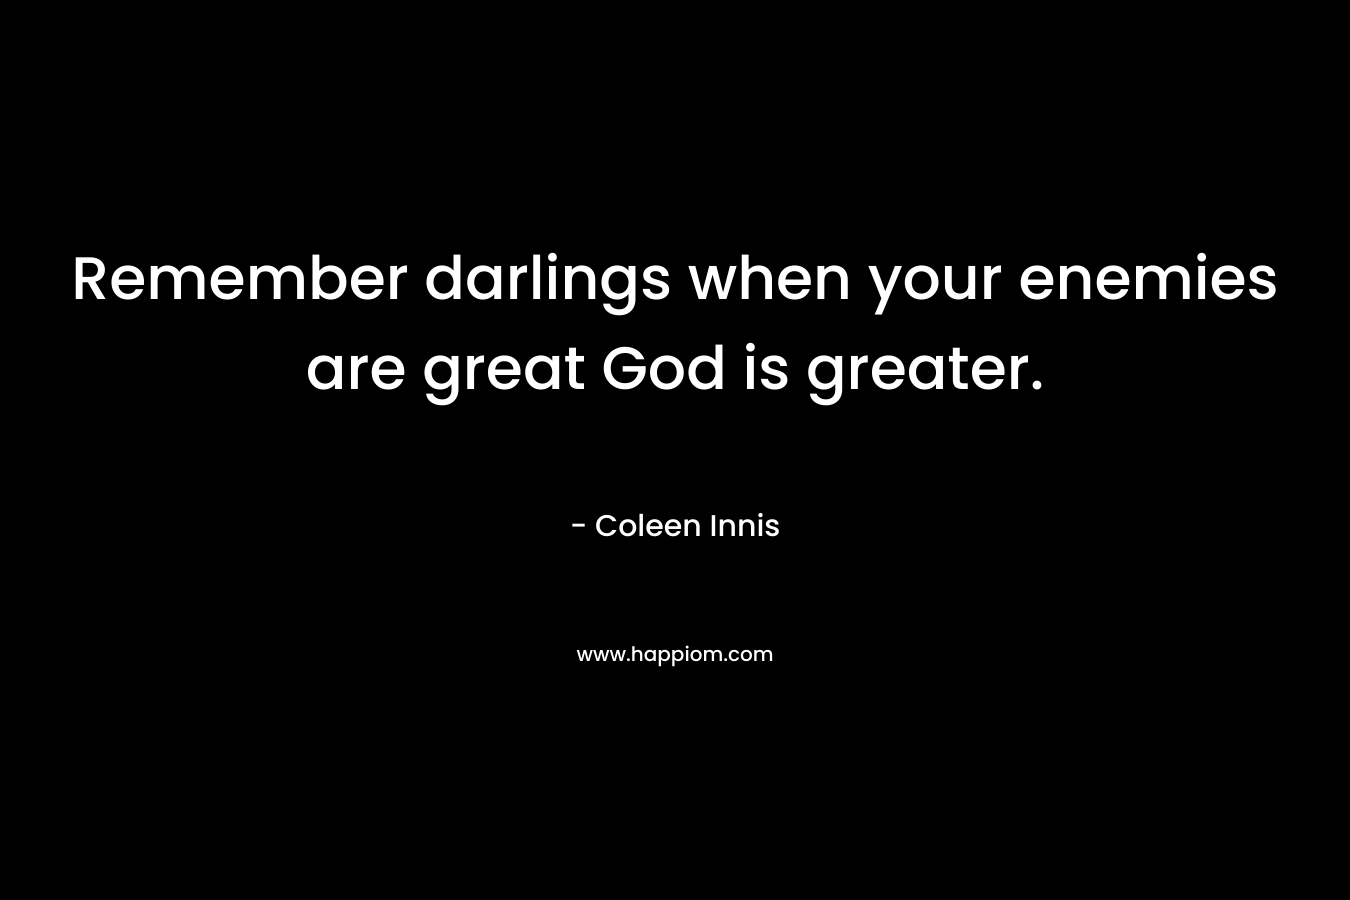 Remember darlings when your enemies are great God is greater.